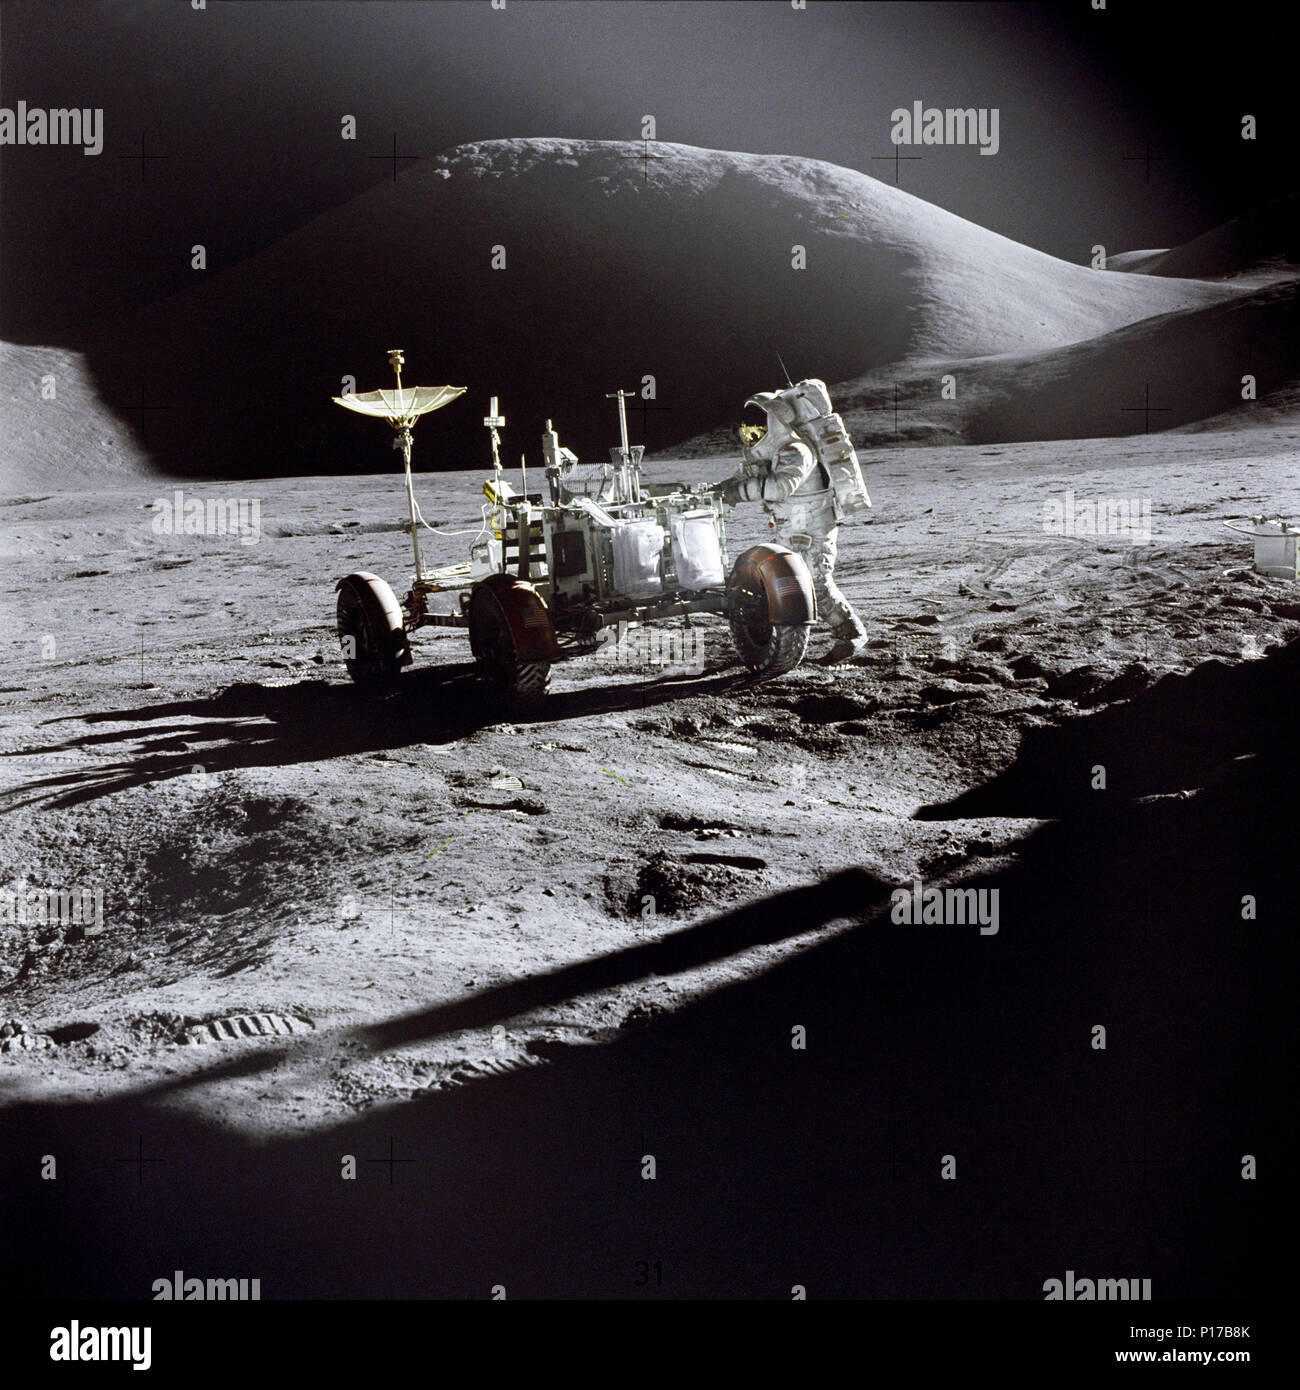 Astronaut James B. Irwin, Lunar Module pilot, works at the Lunar Roving Vehicle during the first Apollo 15 lunar surface extravehicular activity (EVA-1) at the Hadley-Apennine landing site. The shadow of the Lunar Module 'Falcon' is in the foreground. This view is looking northeast, with Mount Hadley in the background. This photograph was taken by Astronaut David R. Scott, Commander. Stock Photo